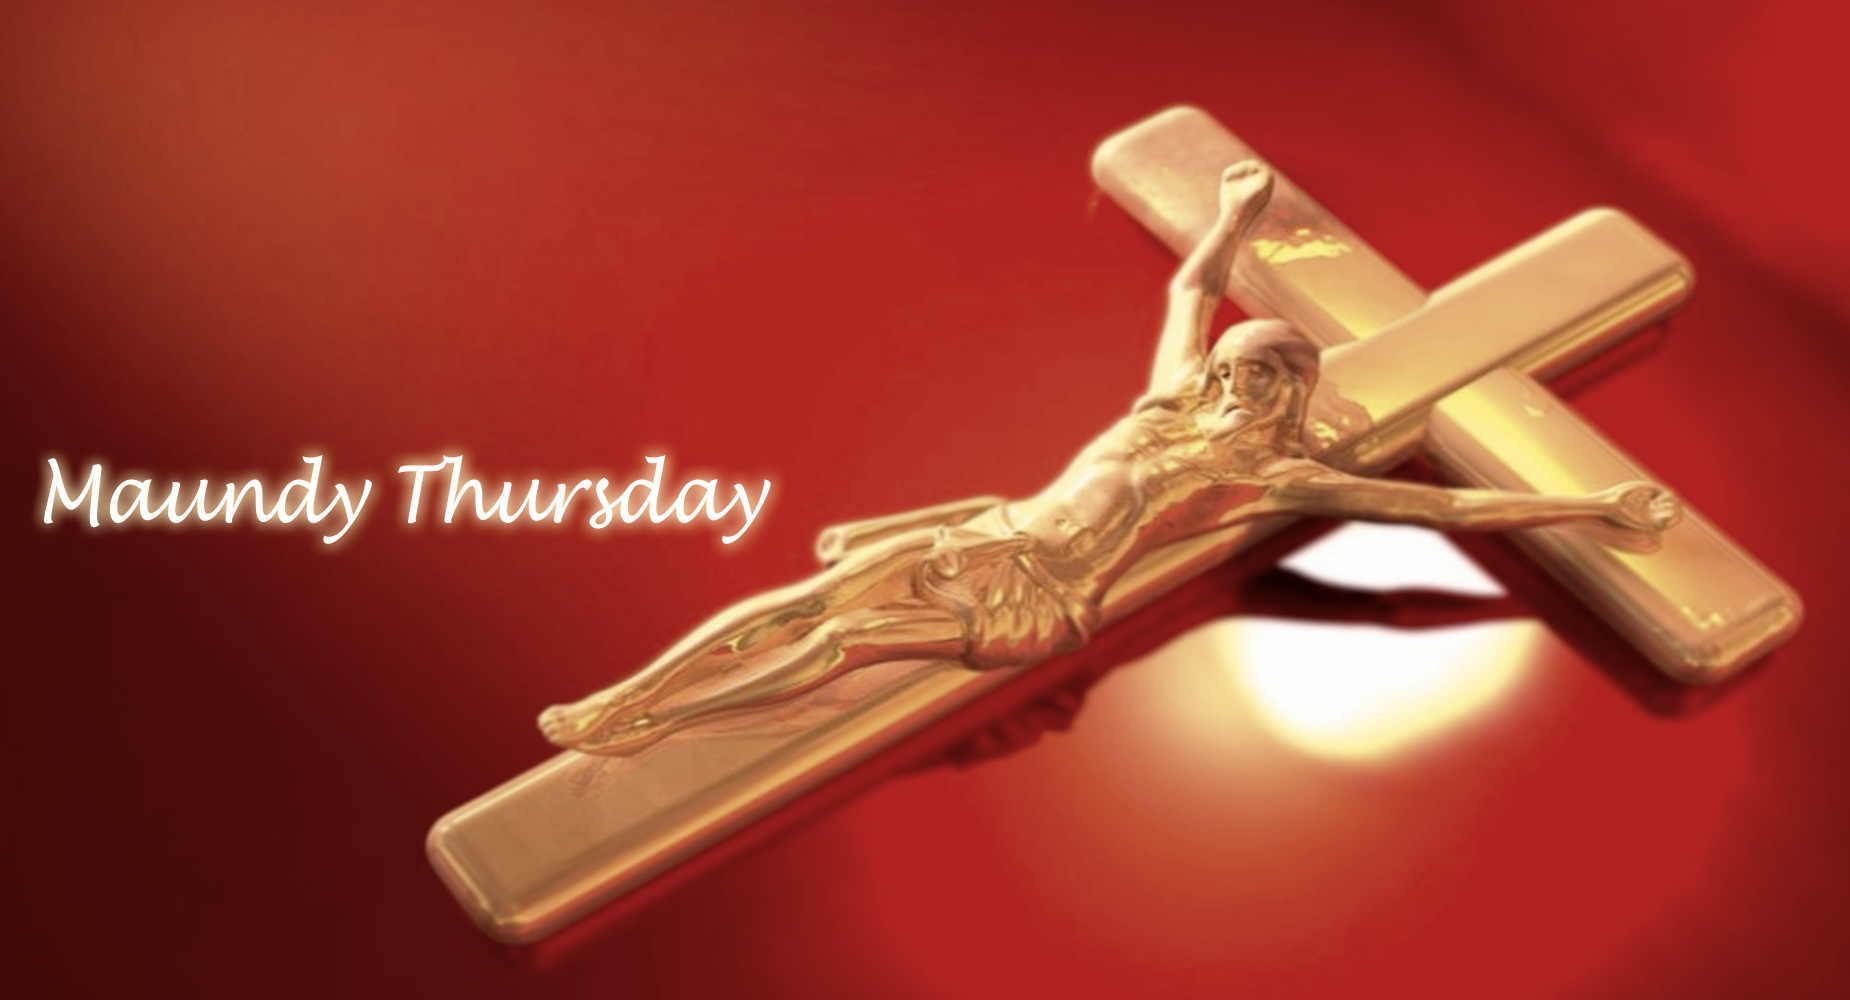 Maundy Thursday Image Wishes Quotes Prayers Messages For